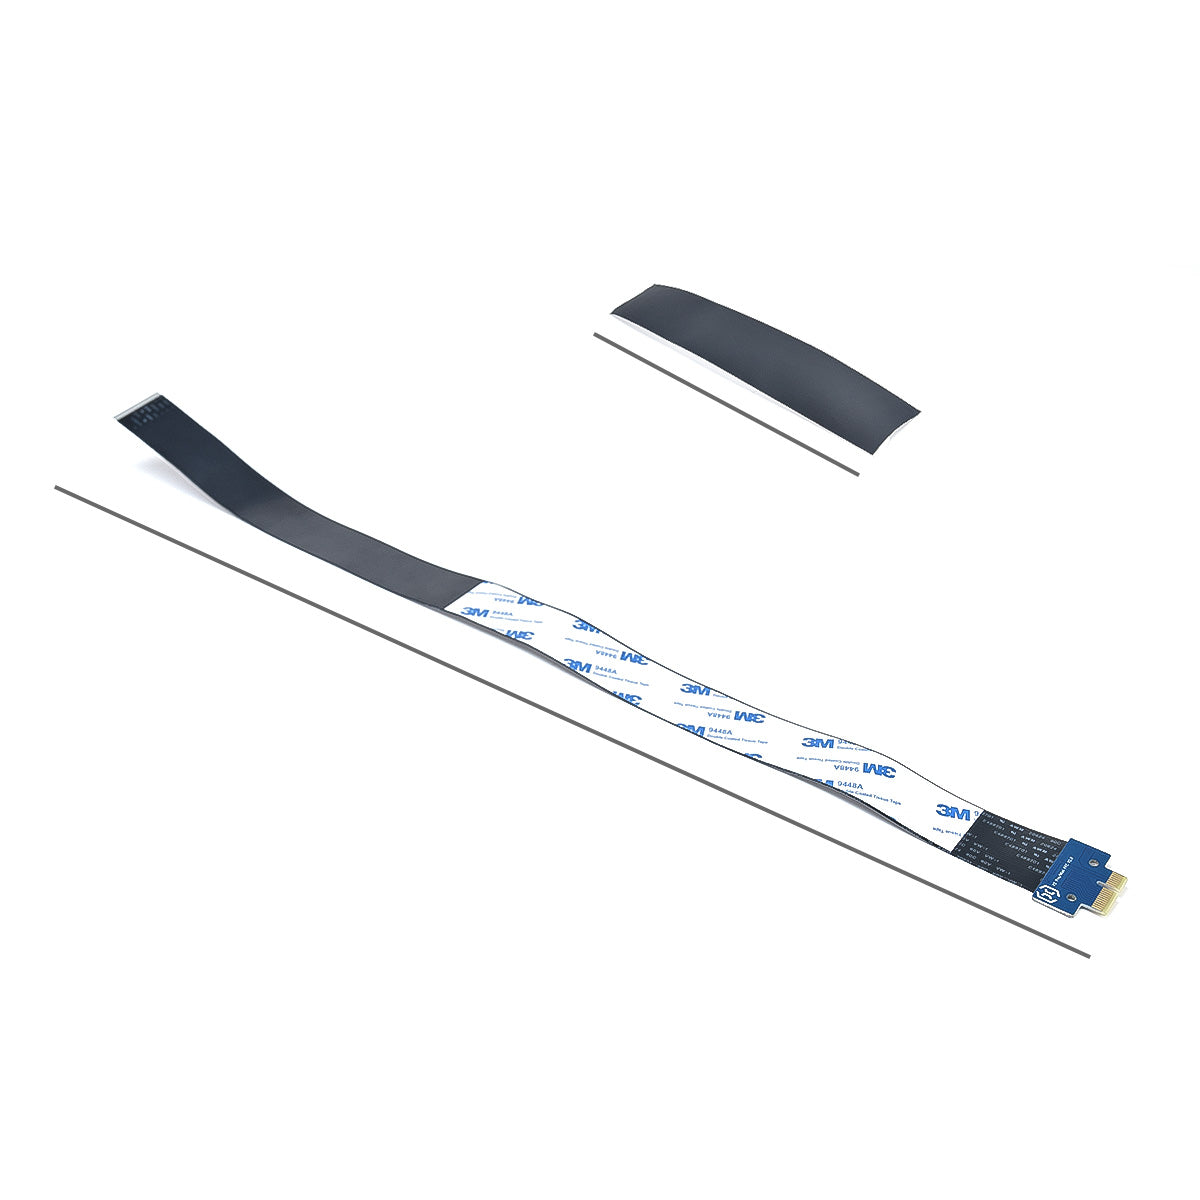 Ribbon Cable for X3 Pro / X3 Plus